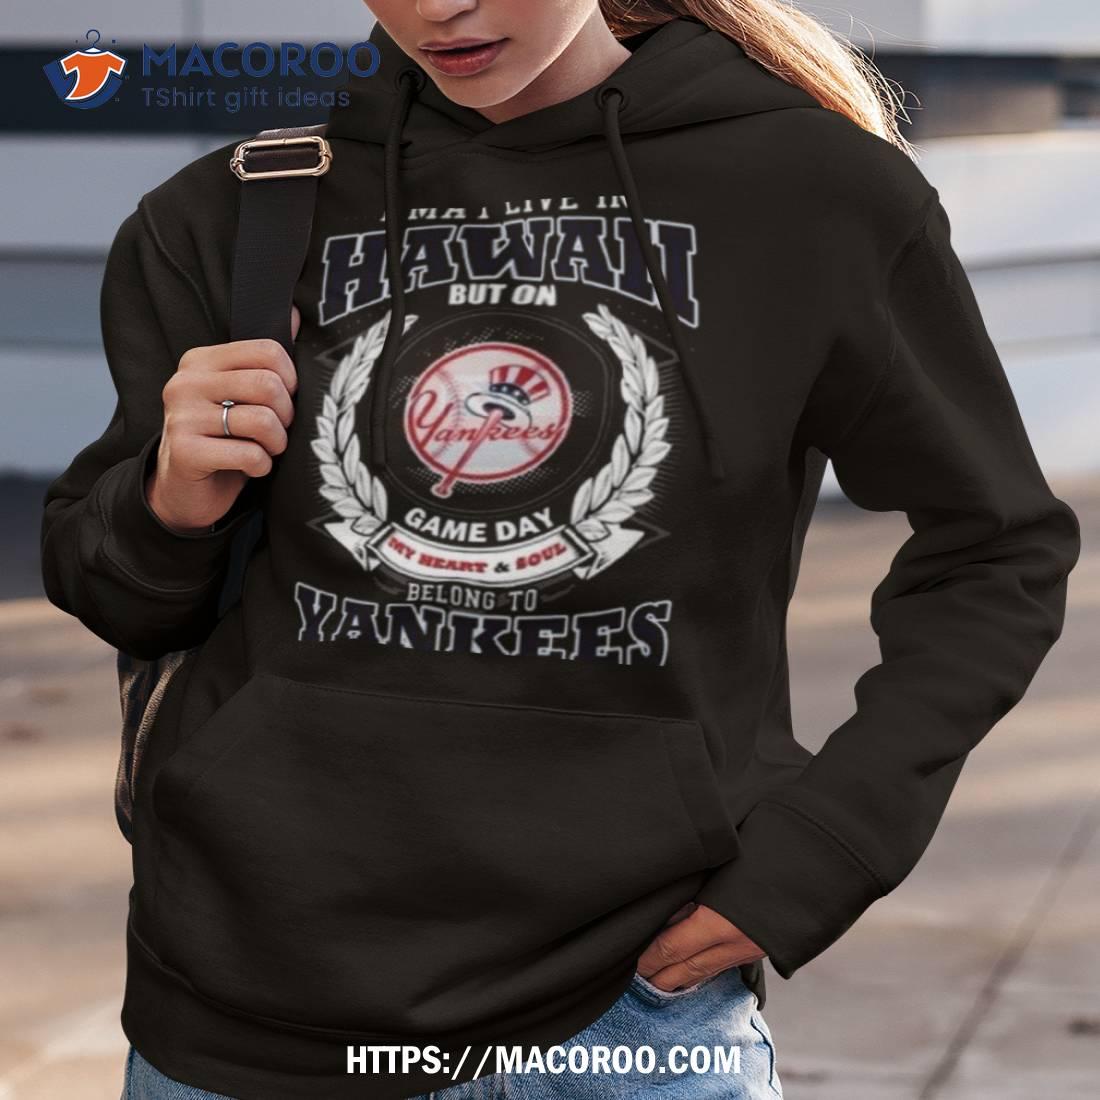 Official I may live in hawaiI belong to new york yankees T-shirt, hoodie,  tank top, sweater and long sleeve t-shirt